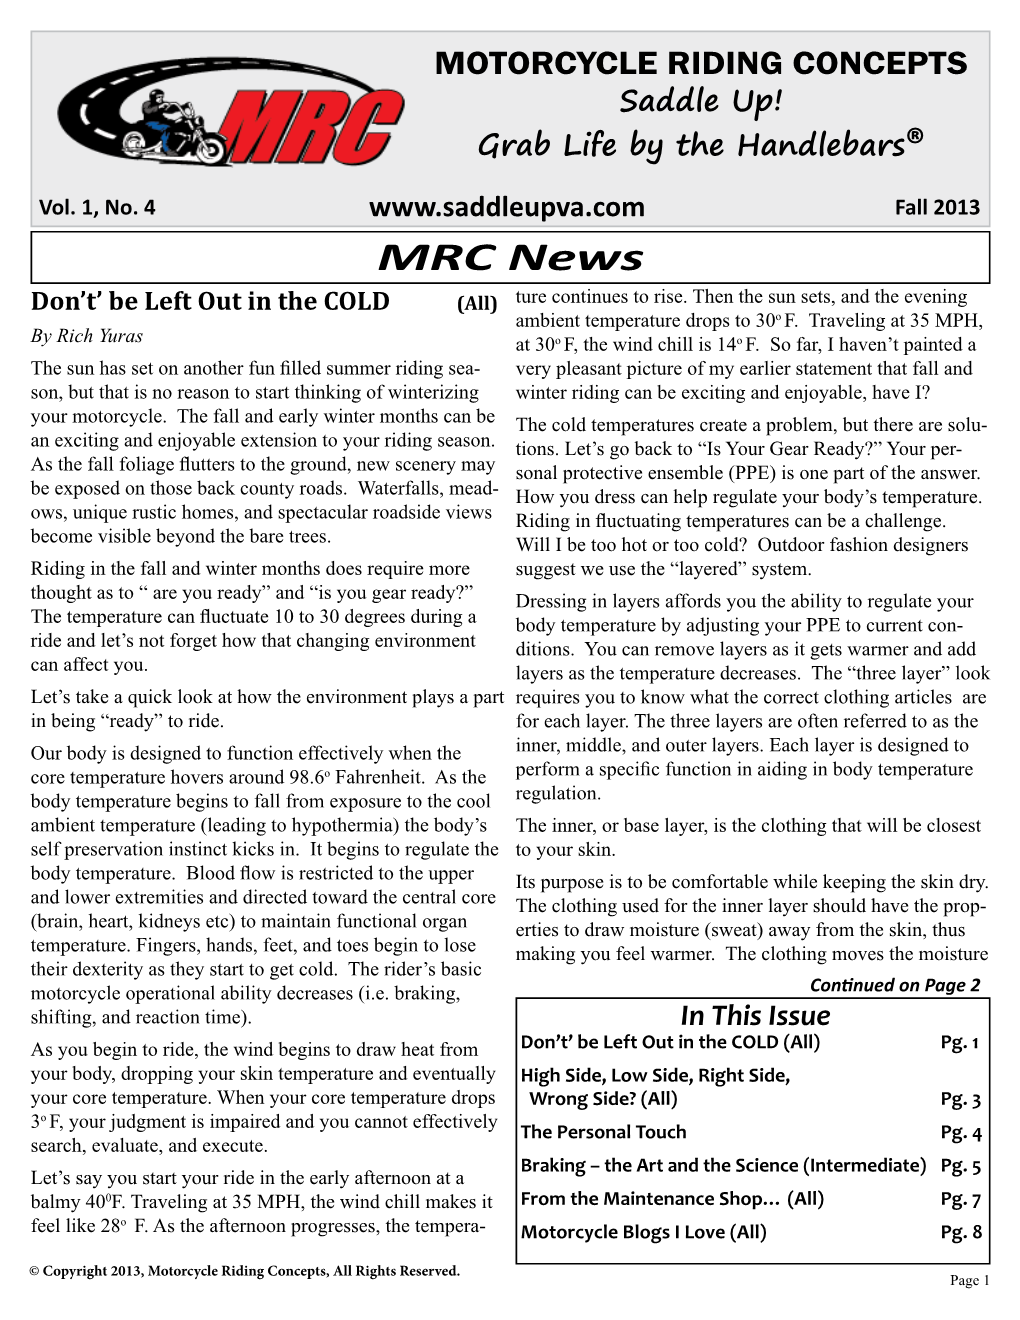 MRC News Don’T’ Be Left out in the COLD (All) Ture Continues to Rise